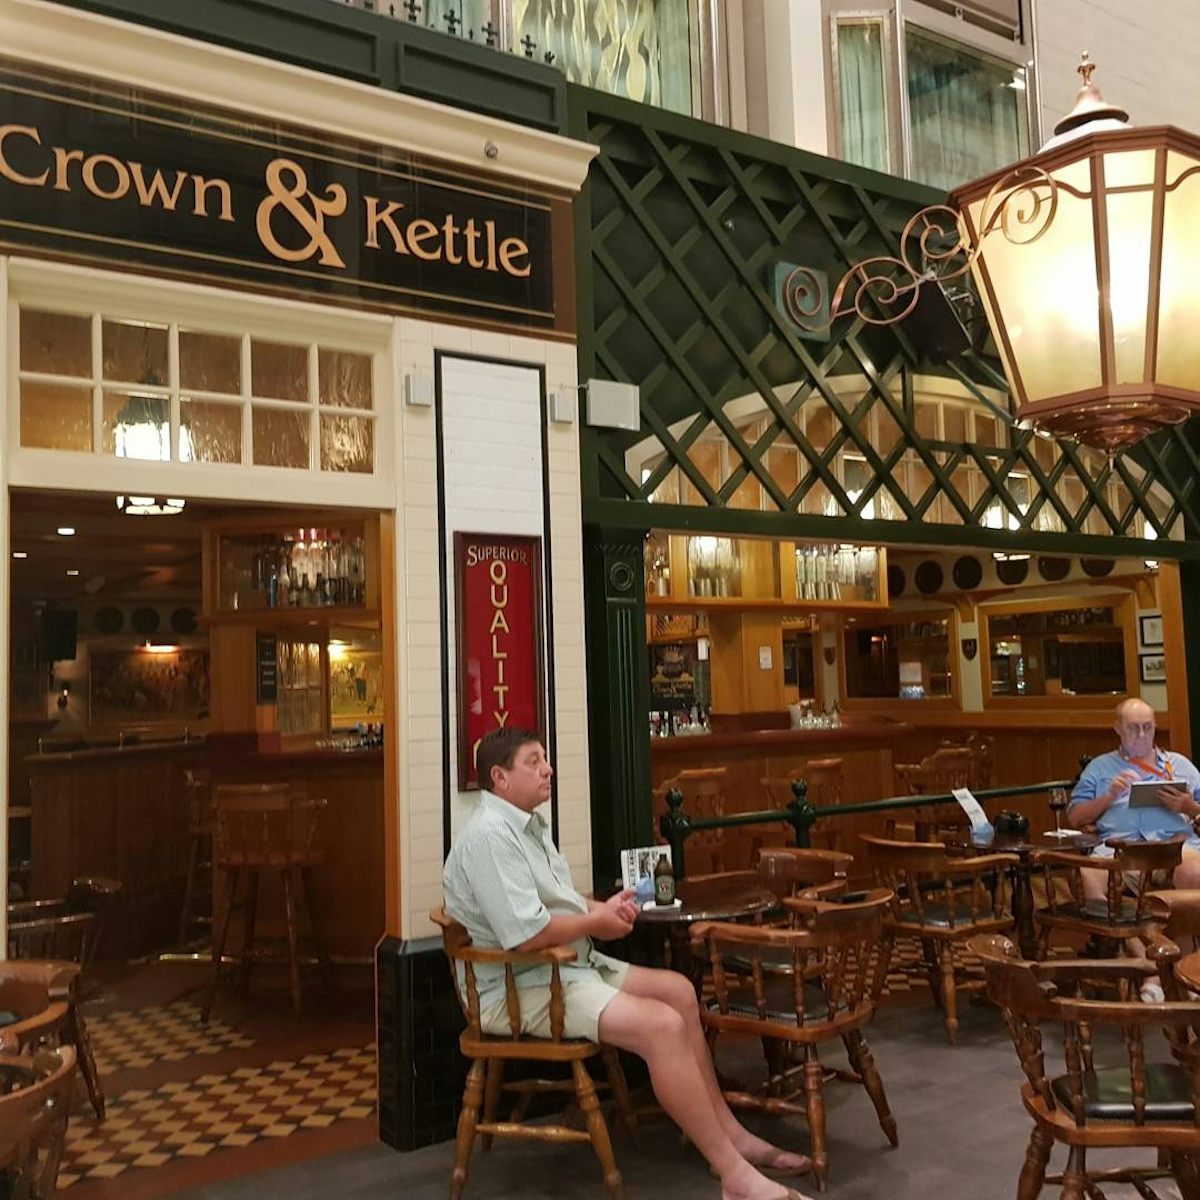 outside Crown and Kettle Pub. this was one of our favourite haunts on the s